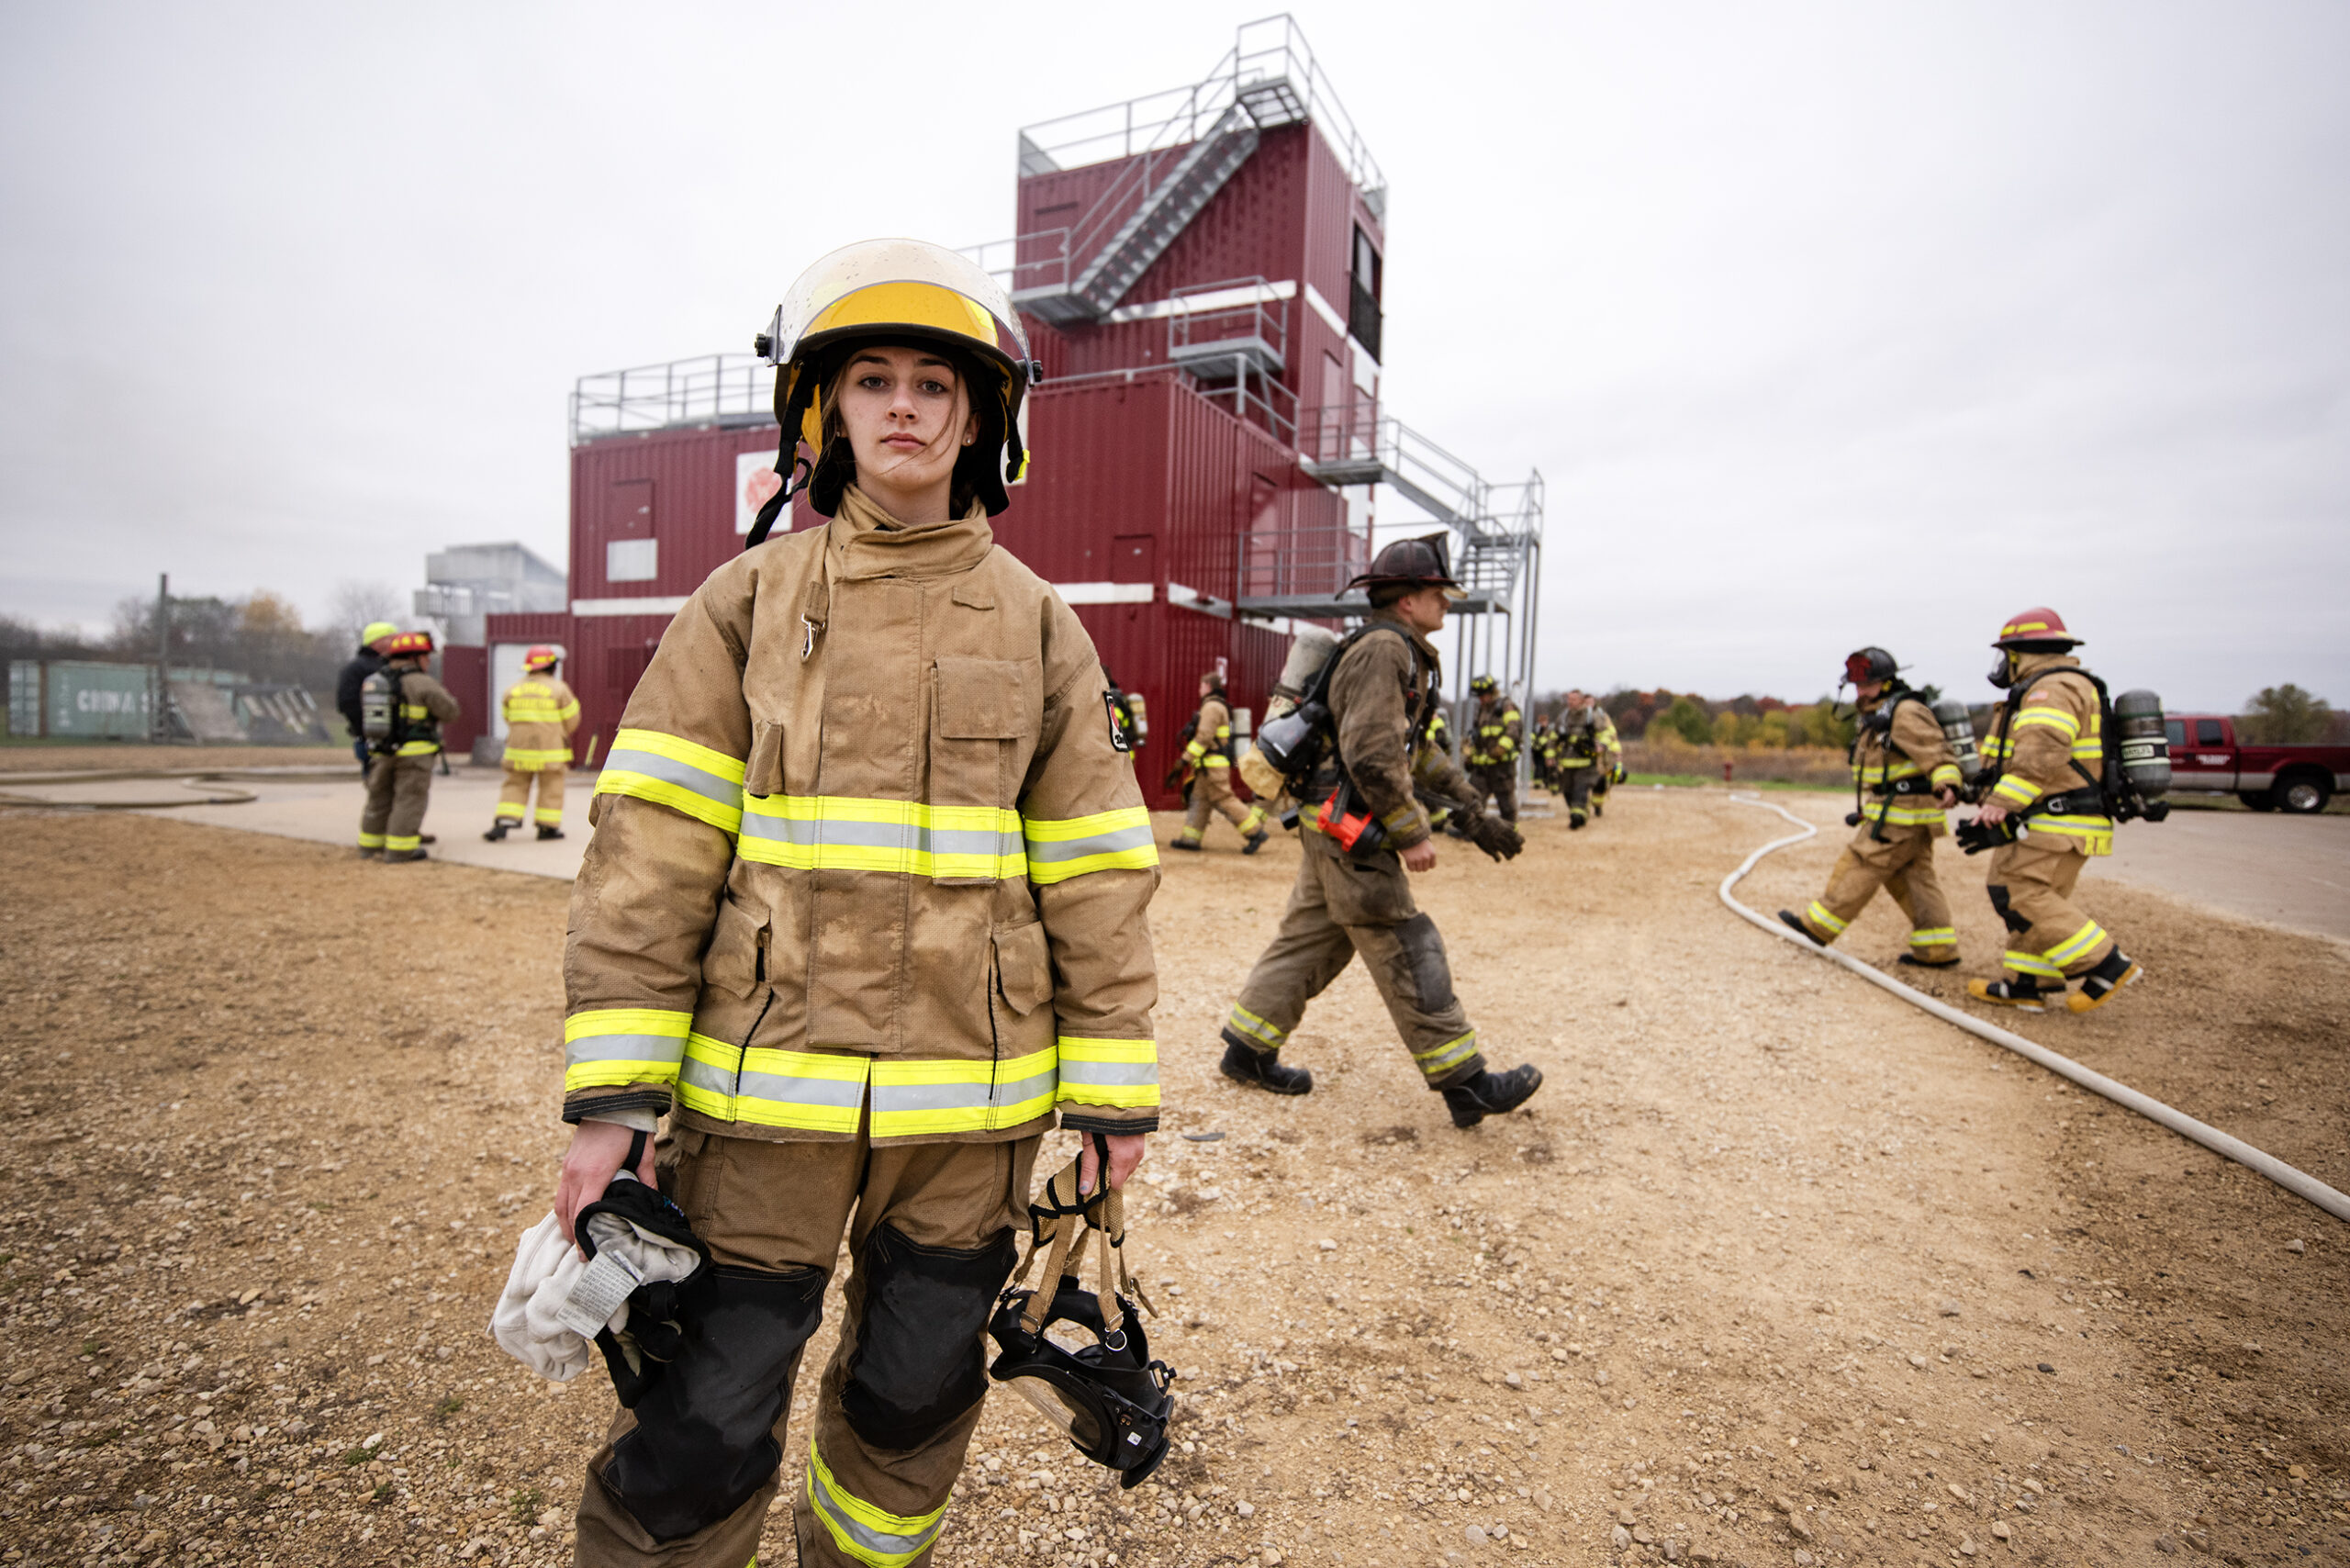 A girl in firefighting gear stands near the exercise as it goes on.